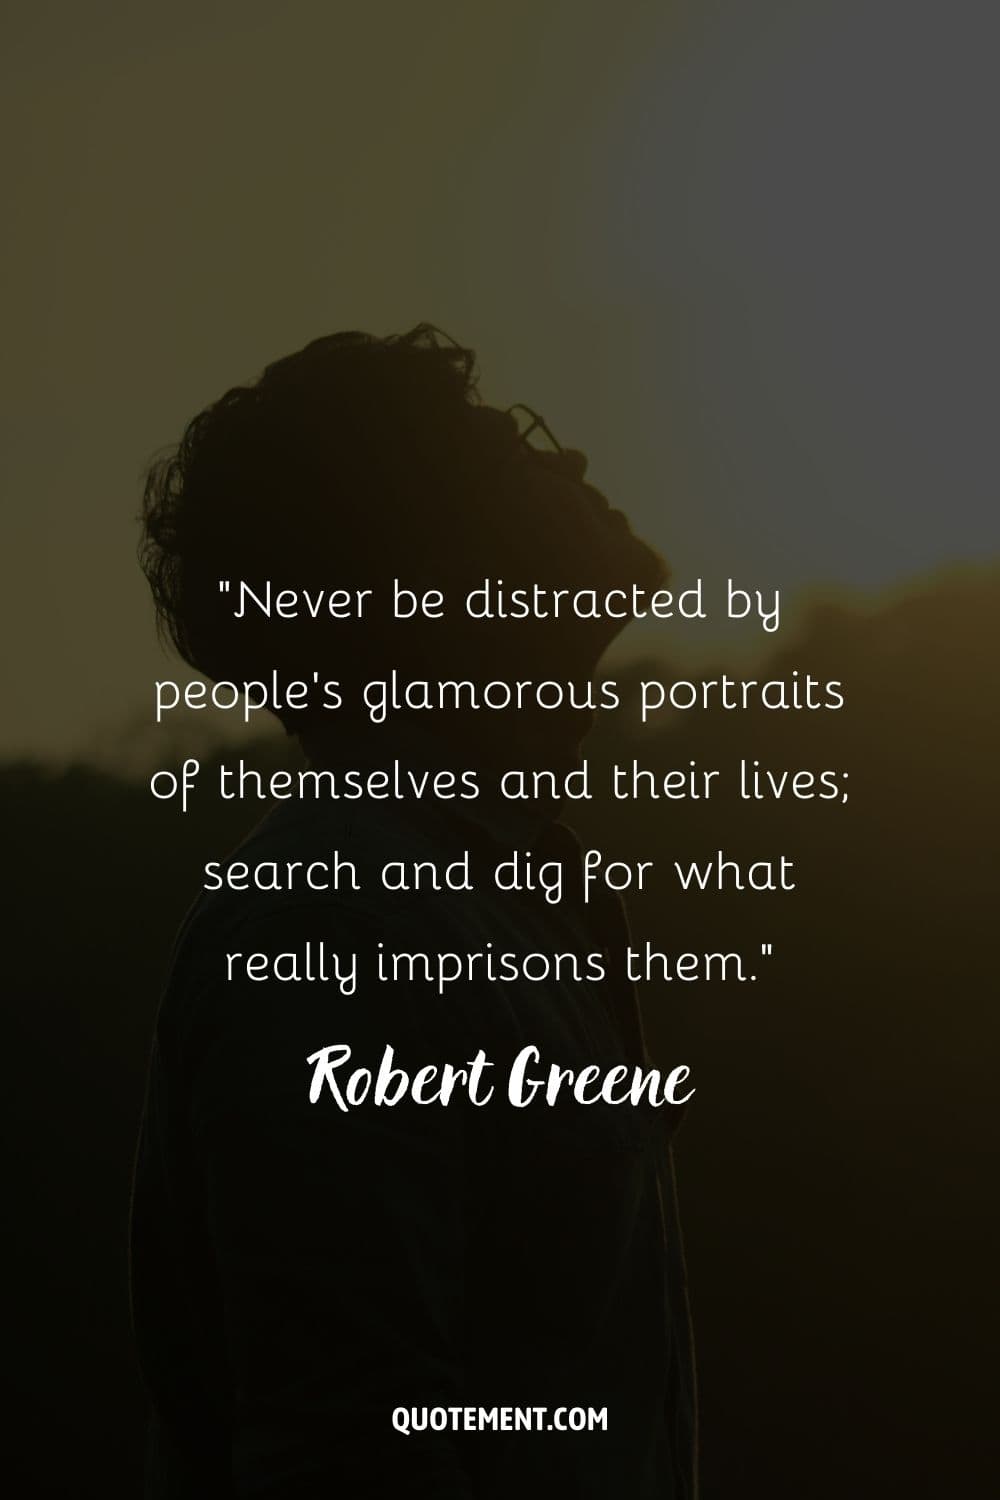 “Never be distracted by people’s glamorous portraits of themselves and their lives; search and dig for what really imprisons them.” ― Robert Greene, The 48 Laws of Power